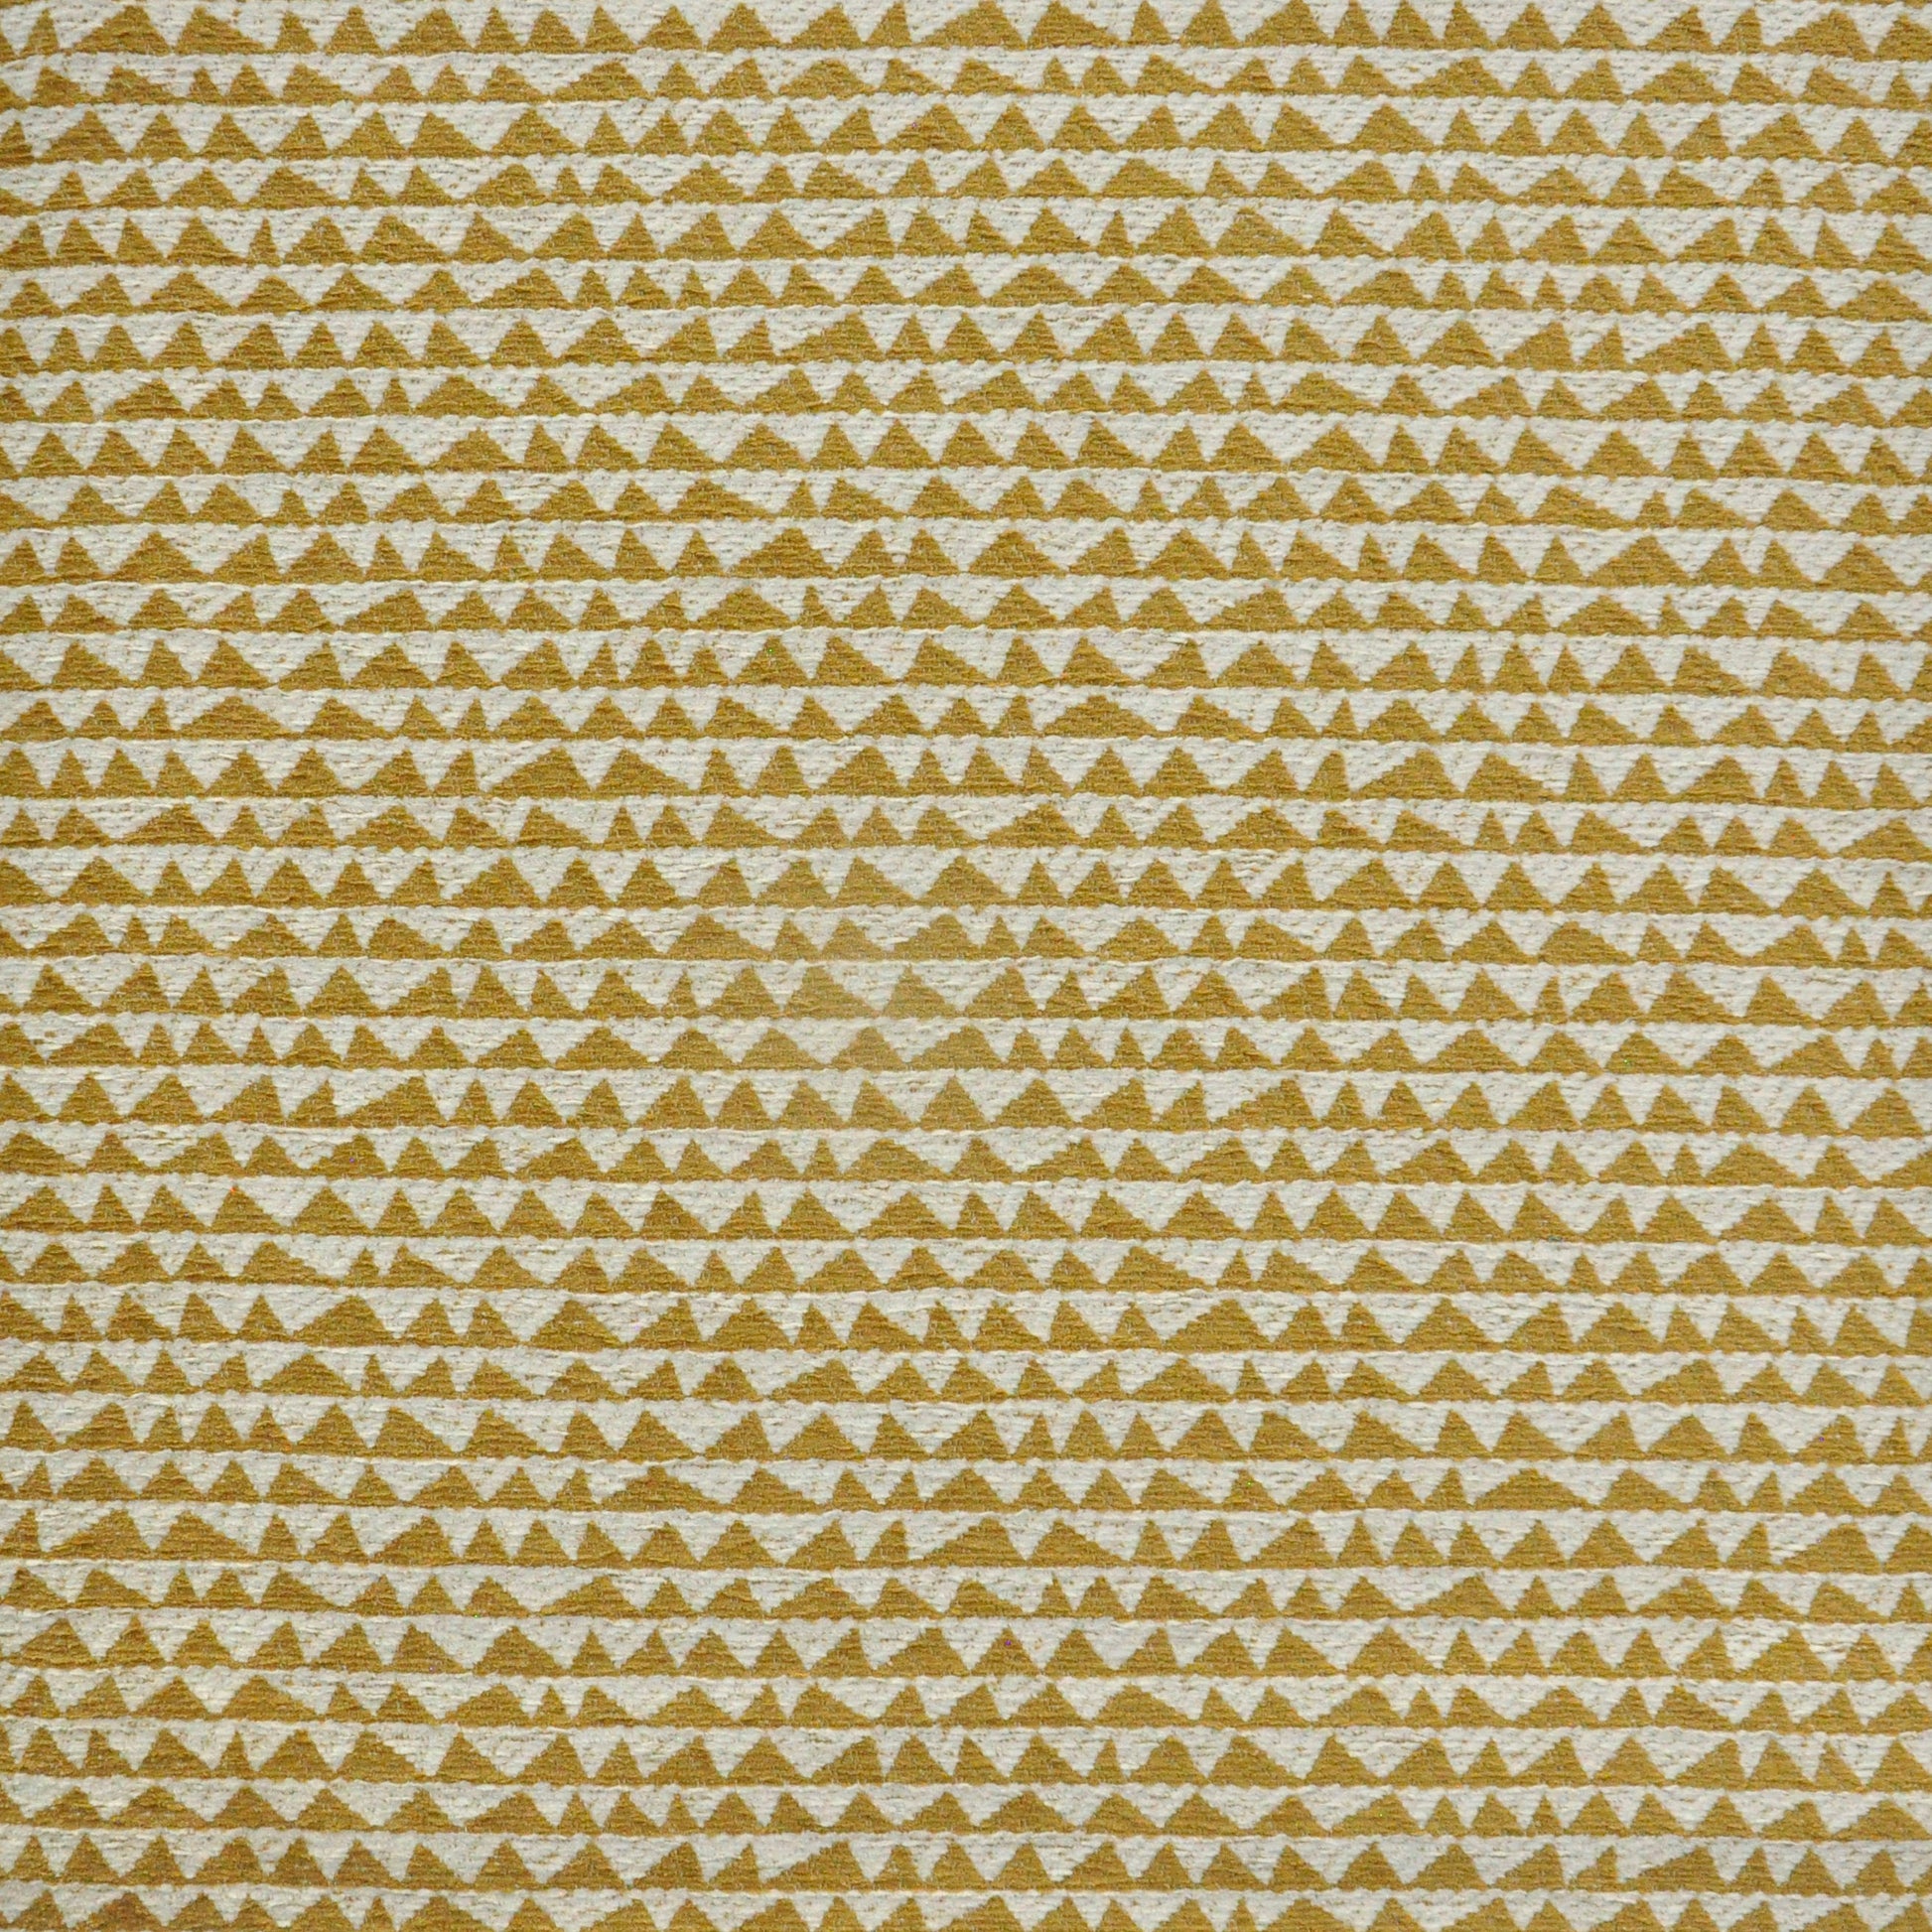 Purchase Maxwell Fabric - Mountaineer, # 807 Camel